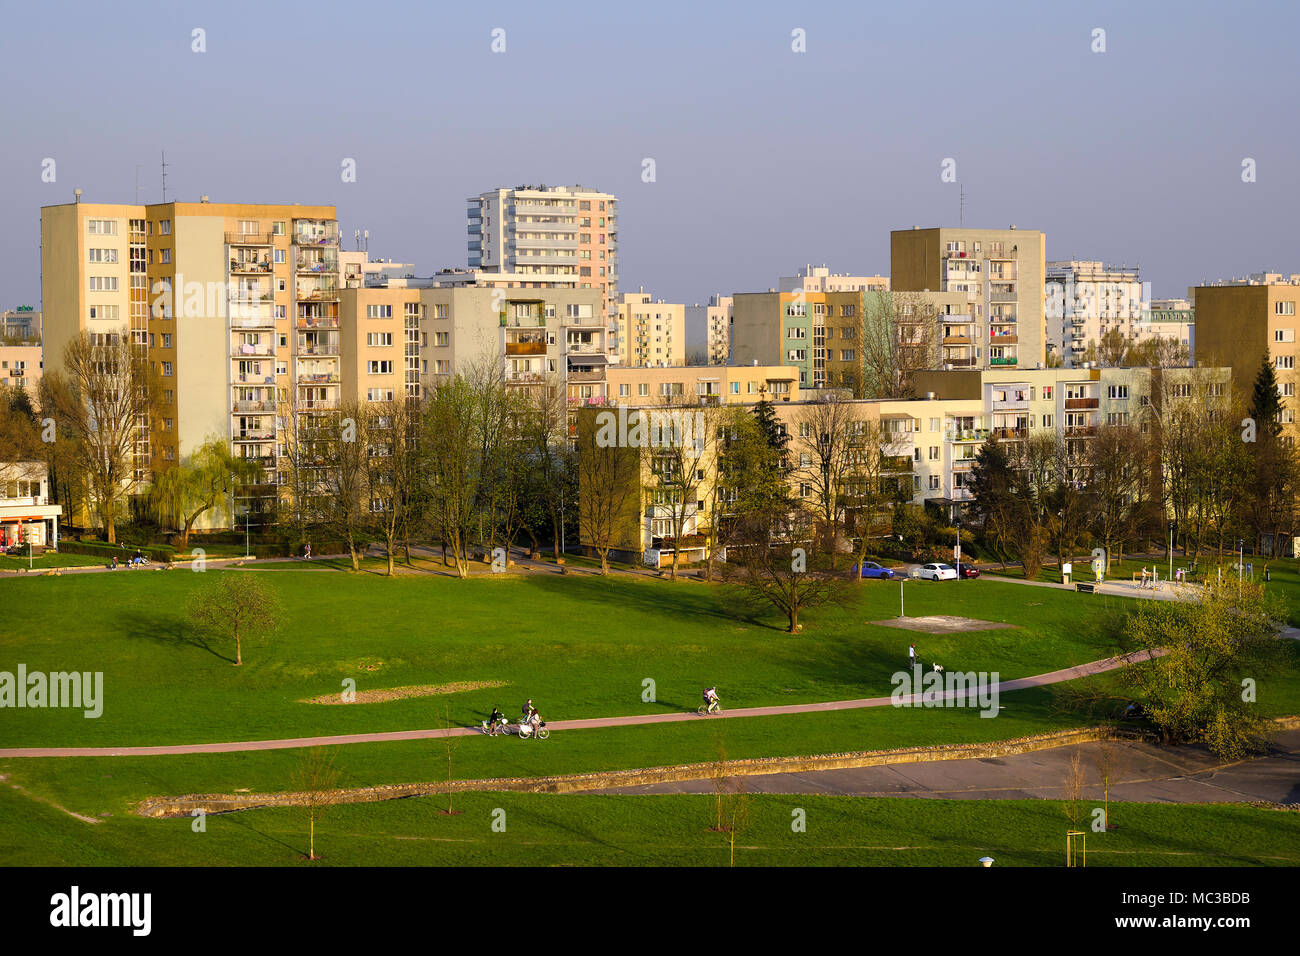 Warsaw, Mazovia / Poland - 2018/04/12: Ursynow quarter - residential district in southern Warsaw, combining post socialist multi-family development wi Stock Photo